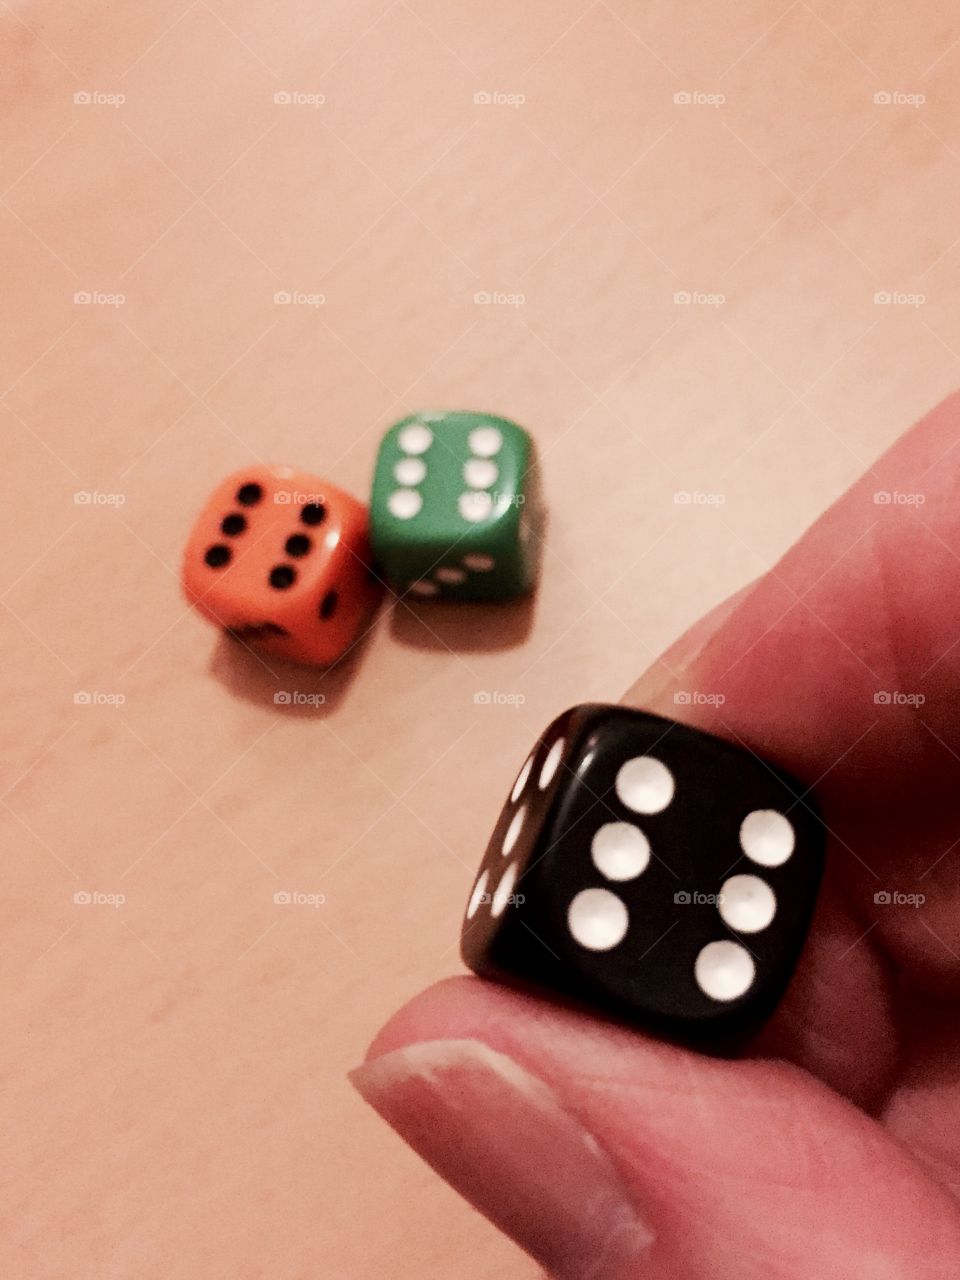 Person holding black dice